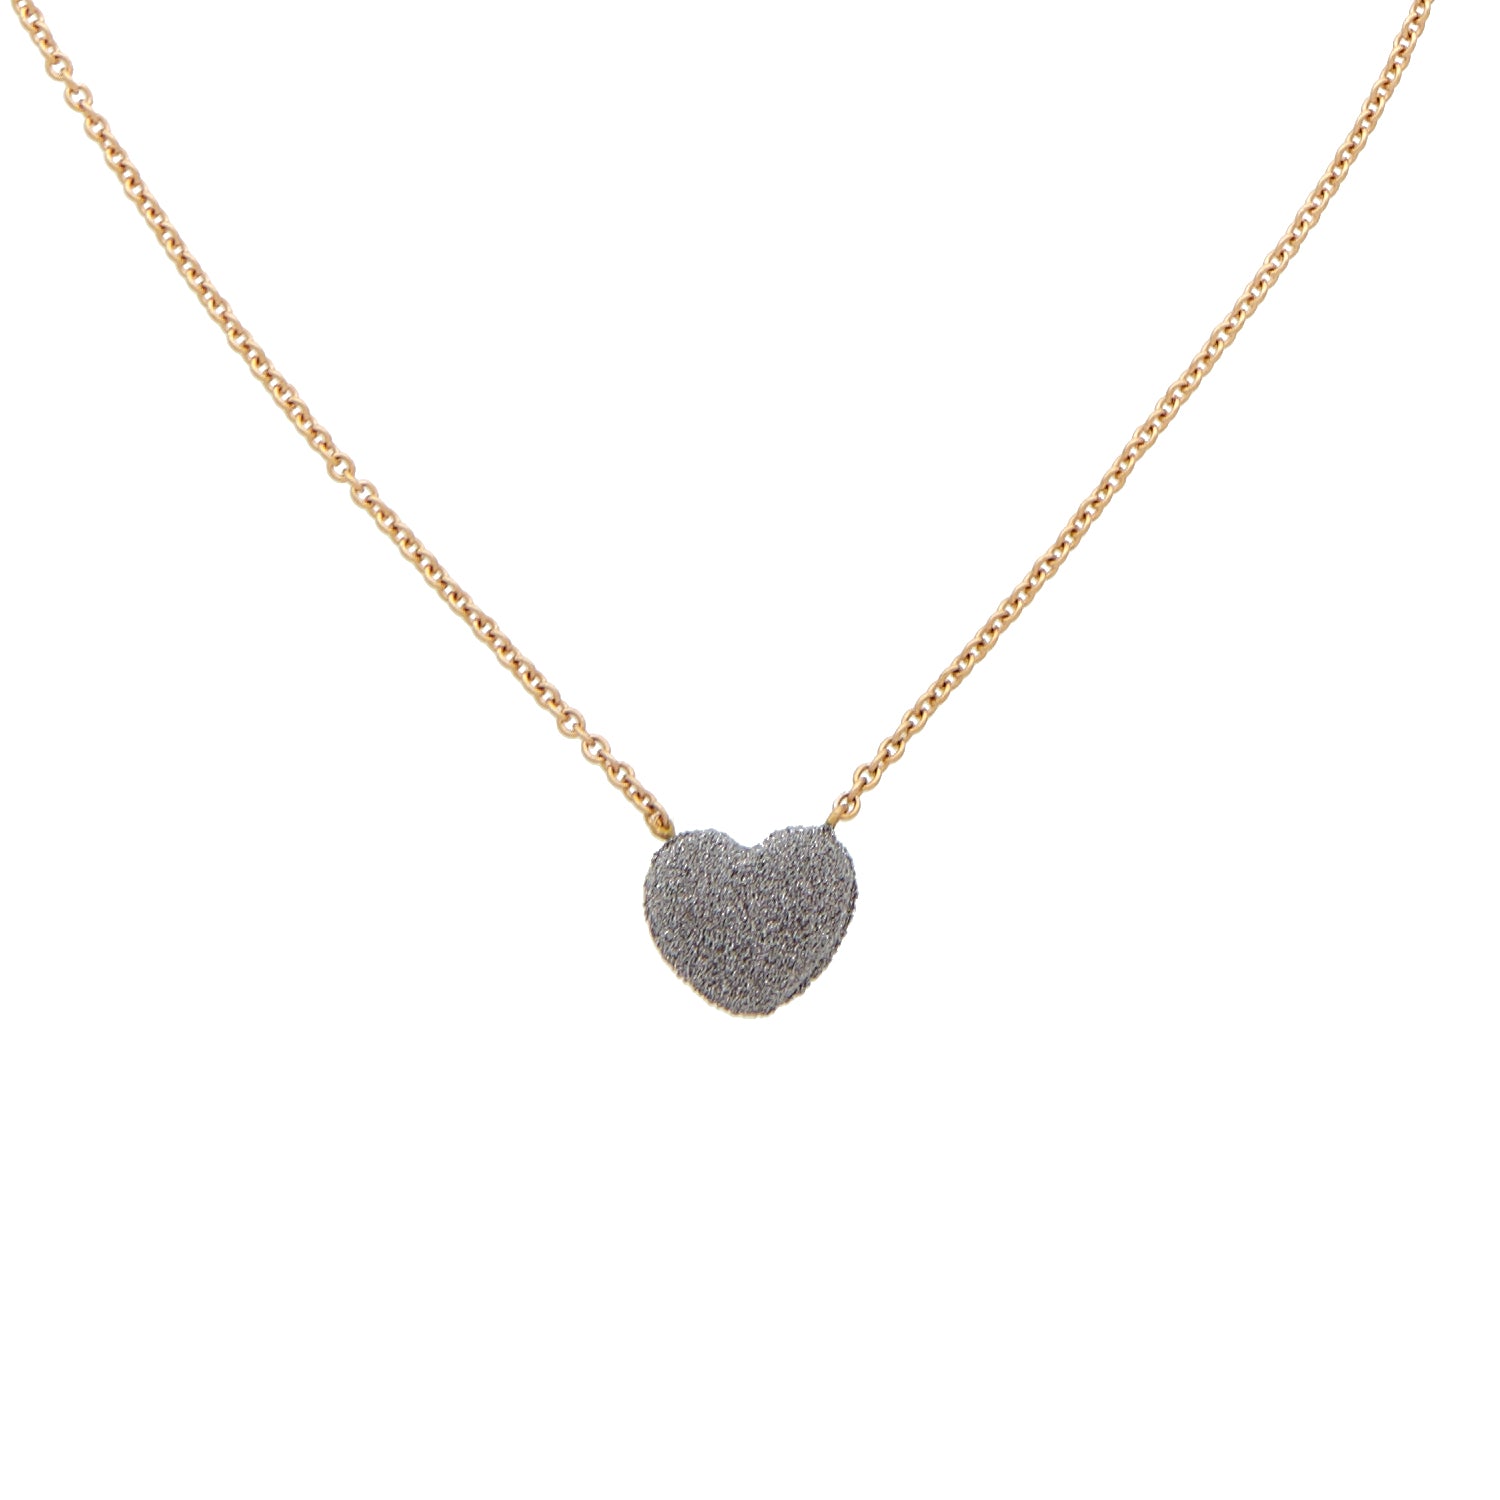 ROSE GOLD HEART NECKLACE